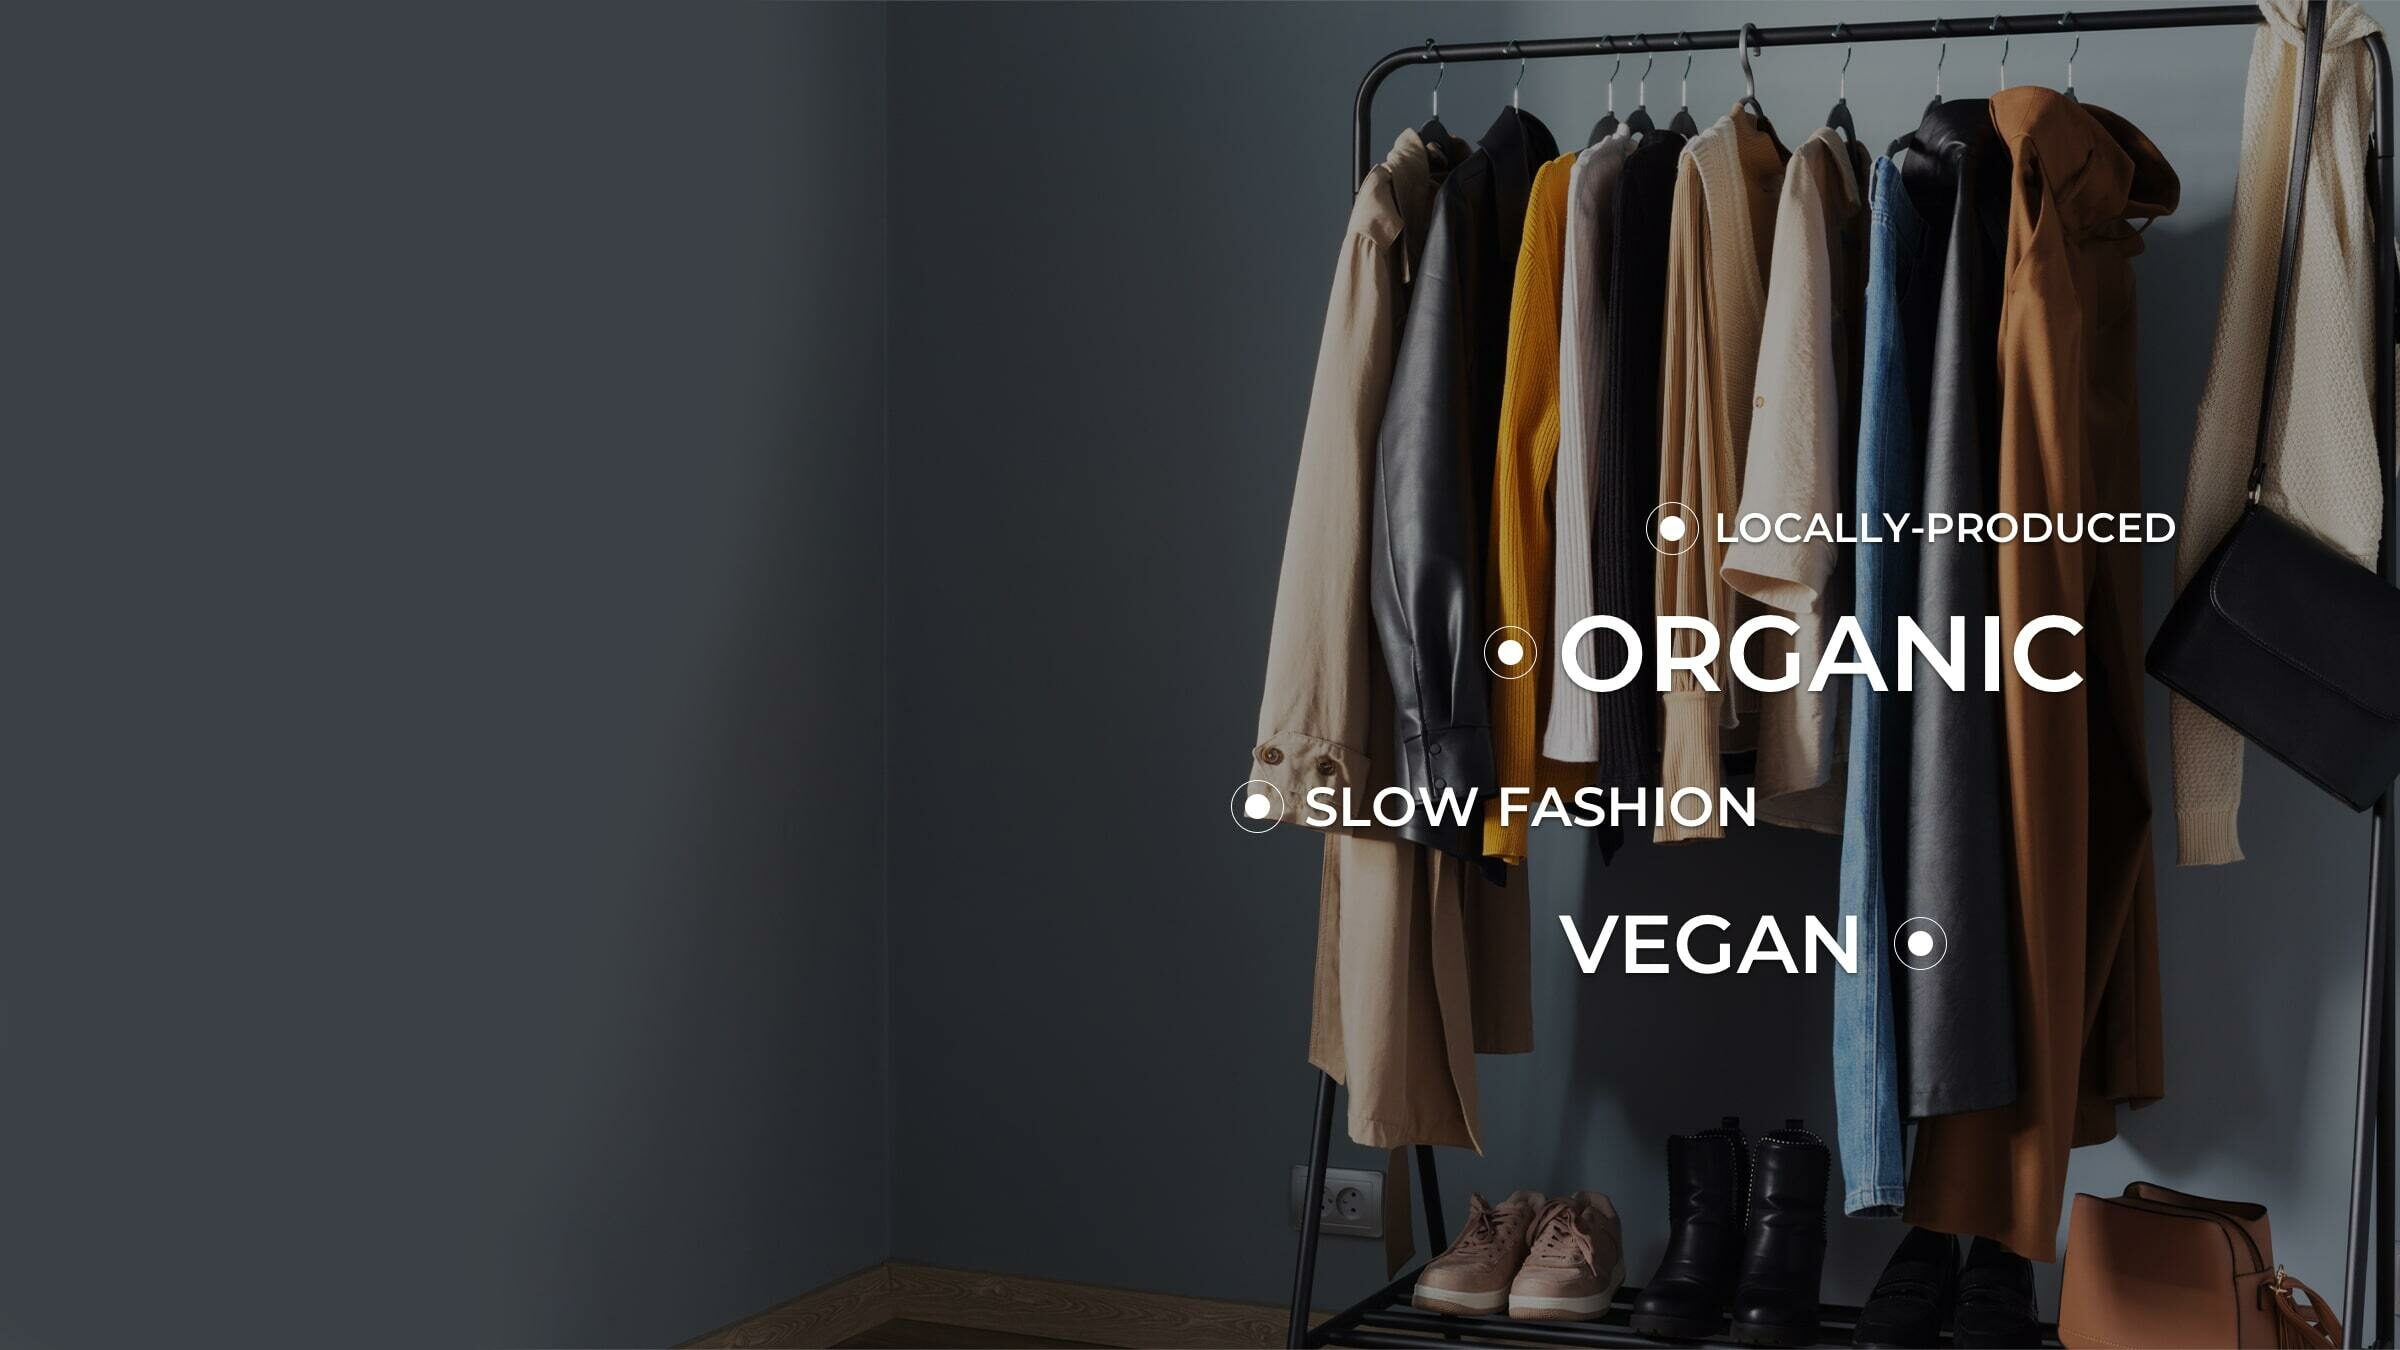 The Role of eCommerce in Sustainable Fashion